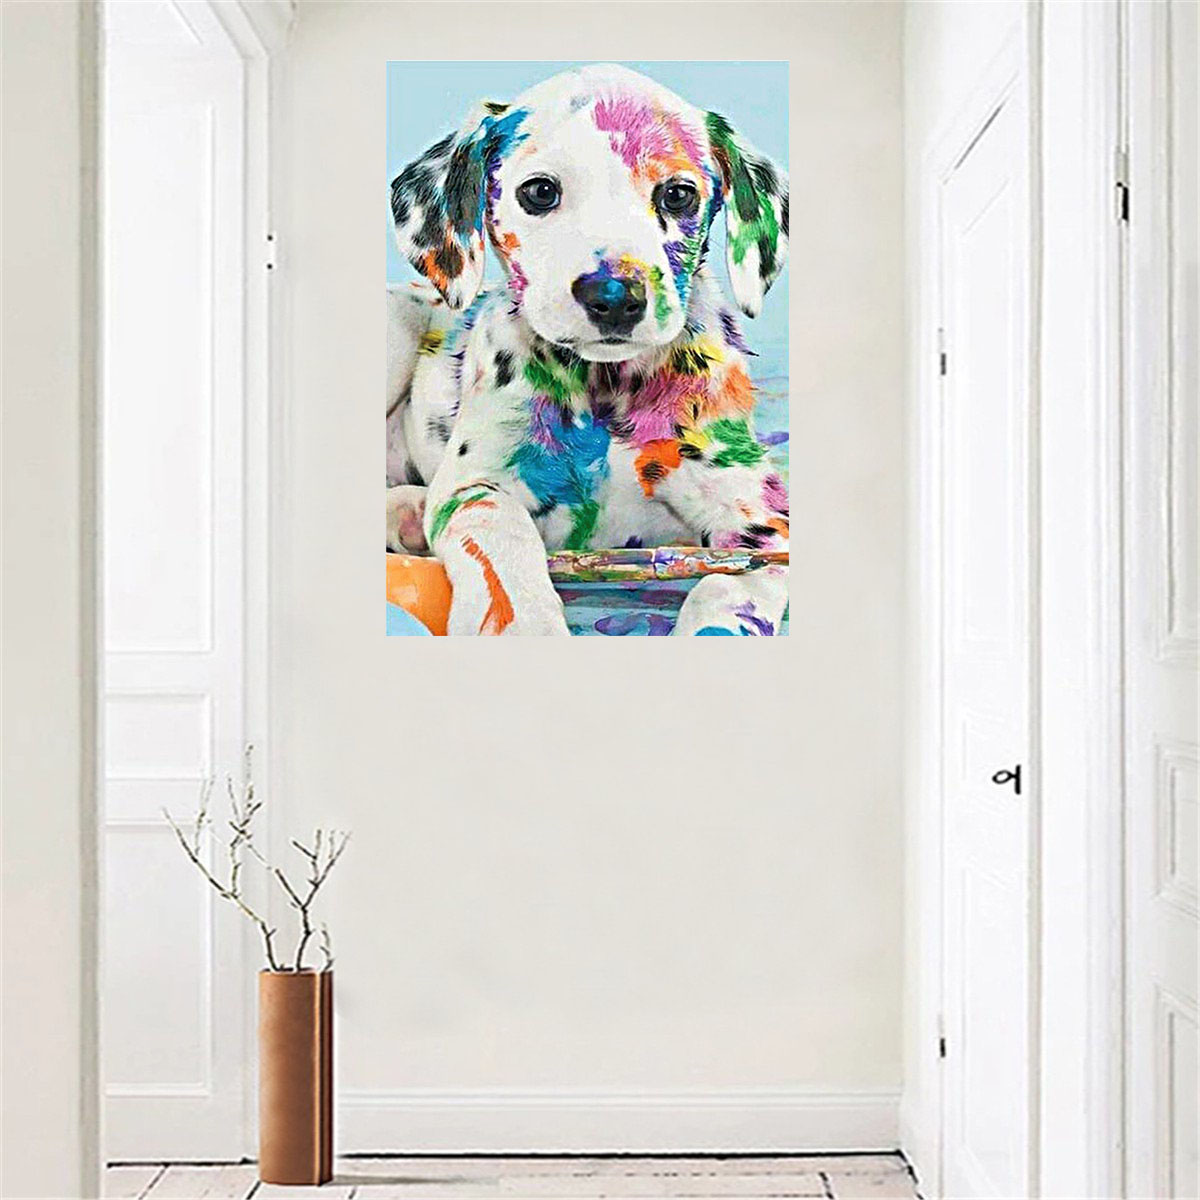 DIY-Diamond-Painting-Animal-Dog-Wall-Painting-Hanging-Pictures-Handmade-Wall-Decorations-Gifts-Drawi-1744046-9